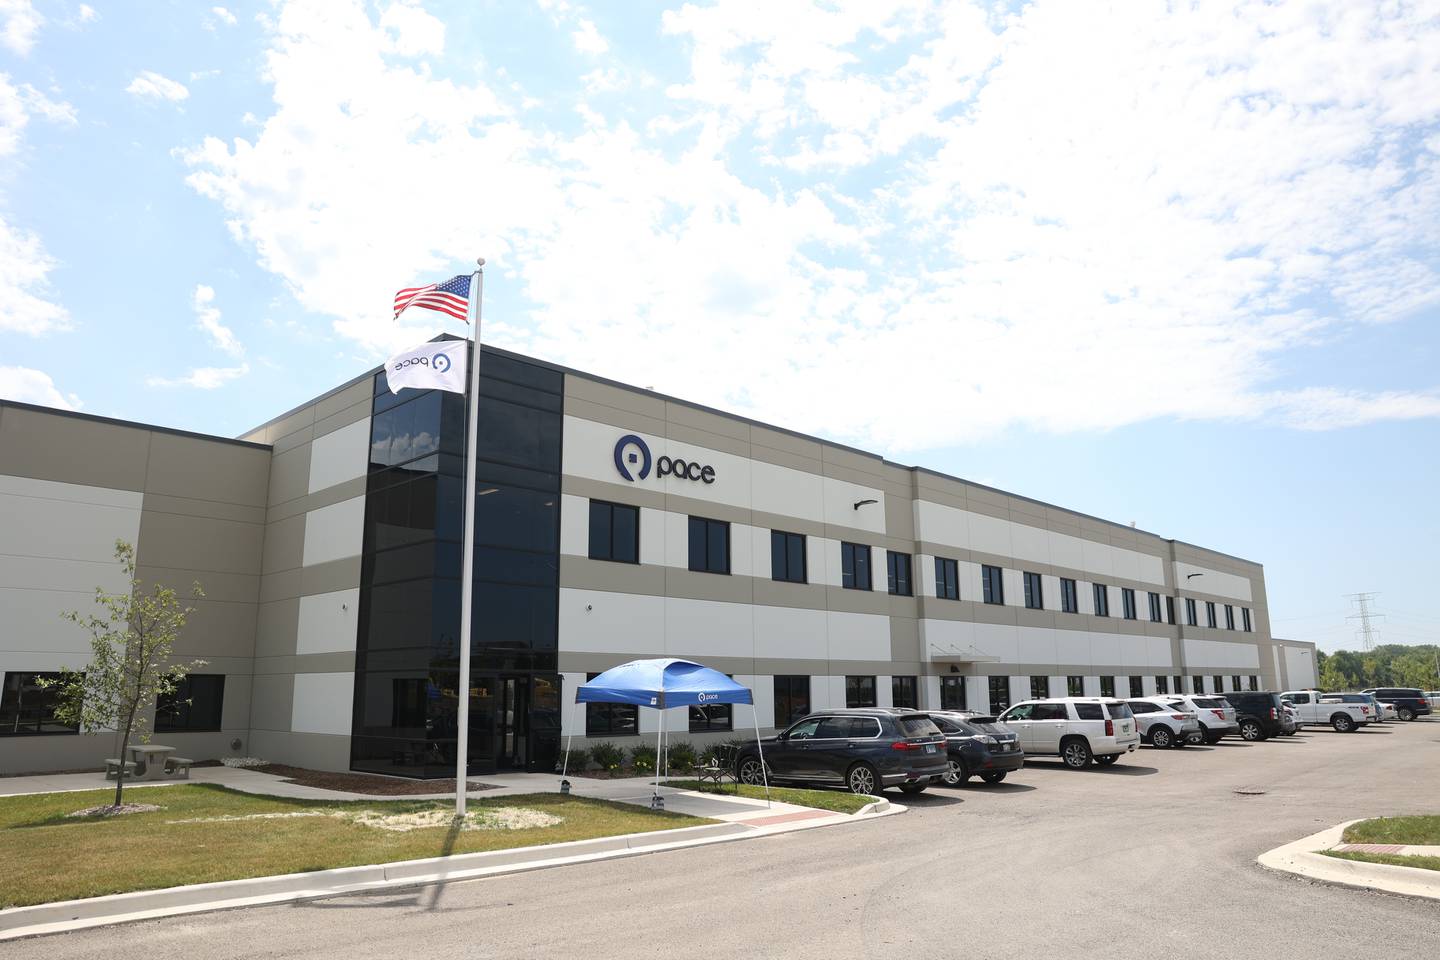 Pace’s new 264,000 square foot state-of-the-art facility in Plainfield. Thursday, July 21, 2022 in Plainfield.